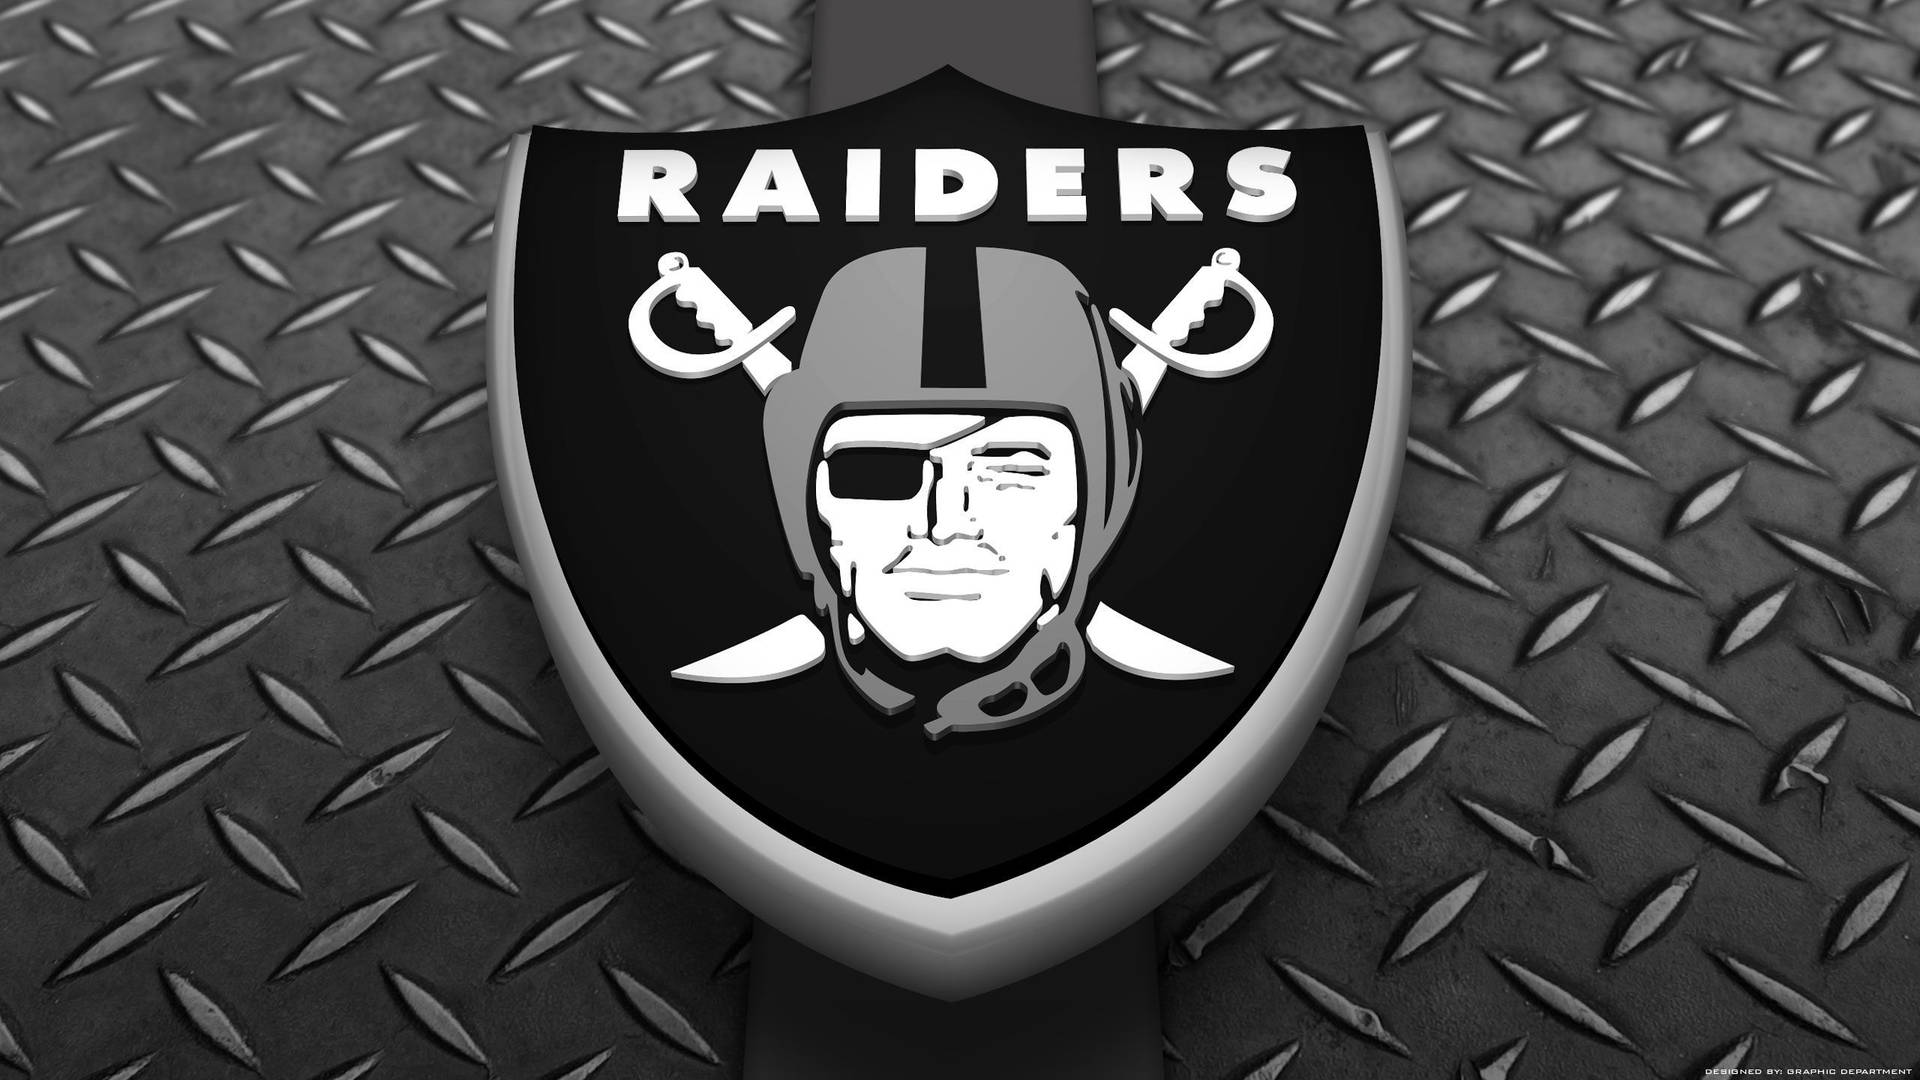 Clear Raiders' Logo Poster Background